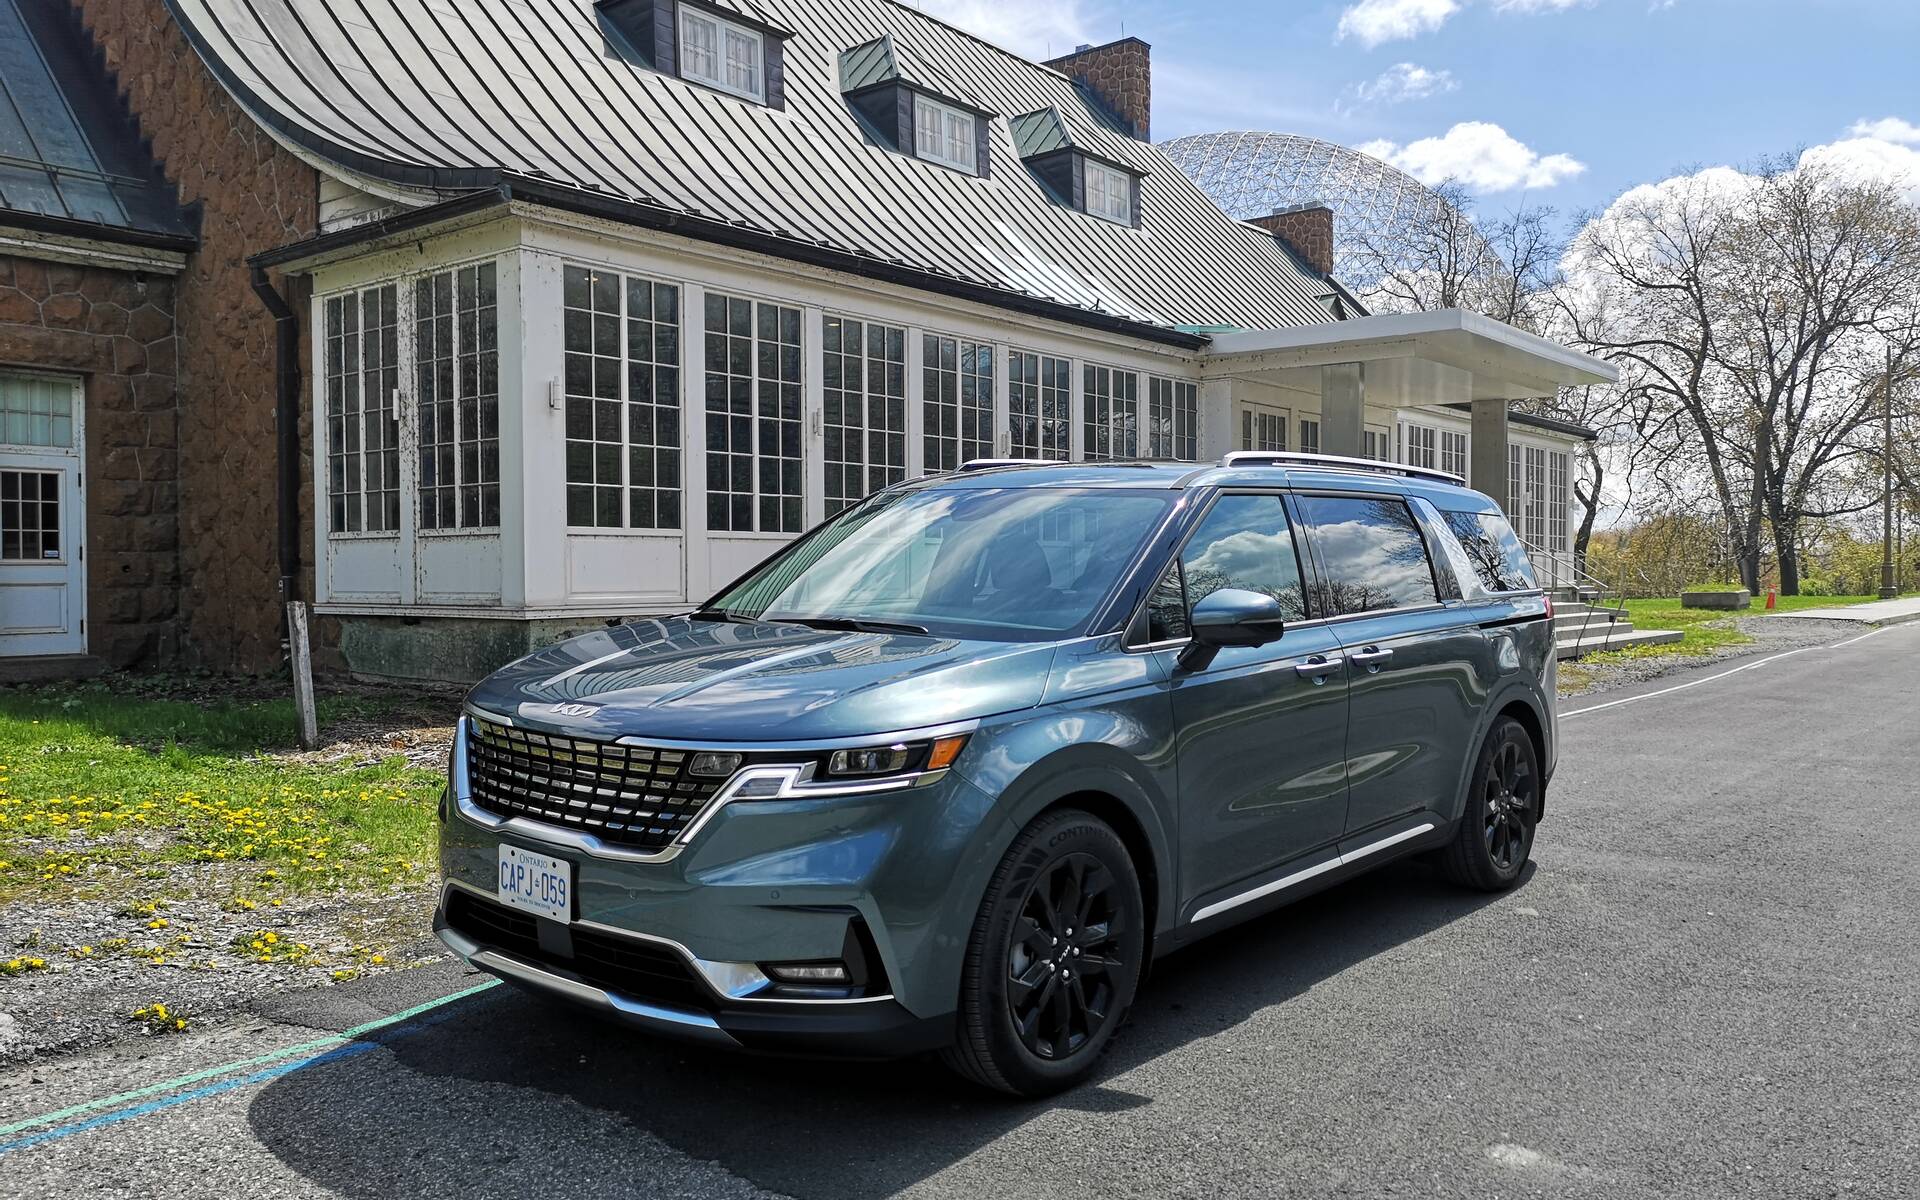 2022 Kia Carnival: There's No Shame in Being a Minivan - The Car Guide